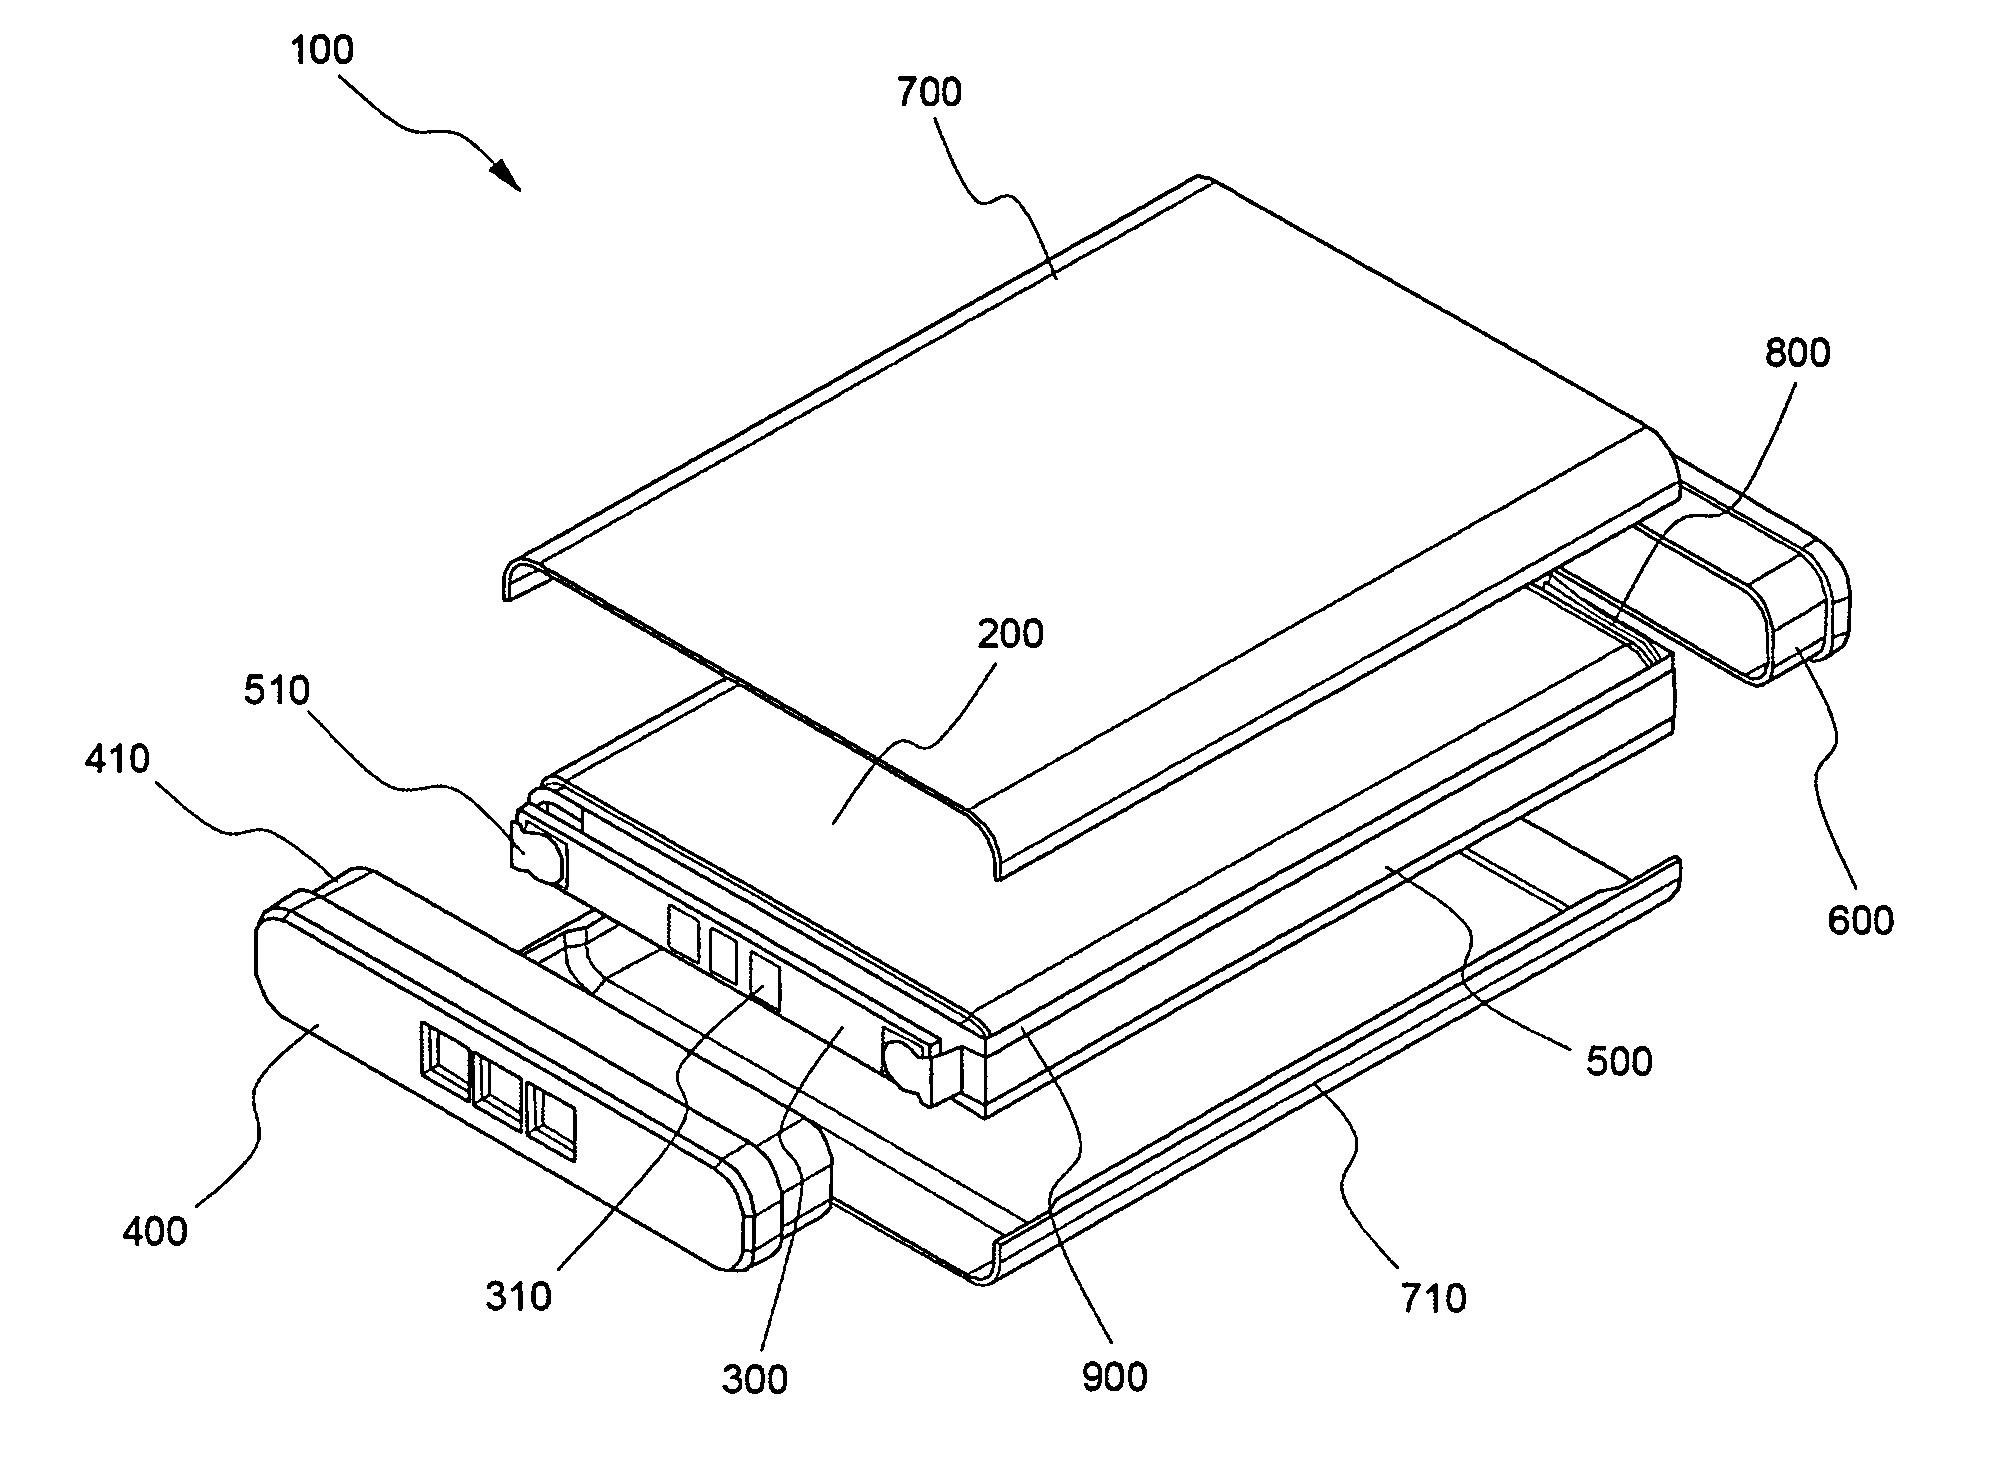 Secondary battery of assemble-type structure